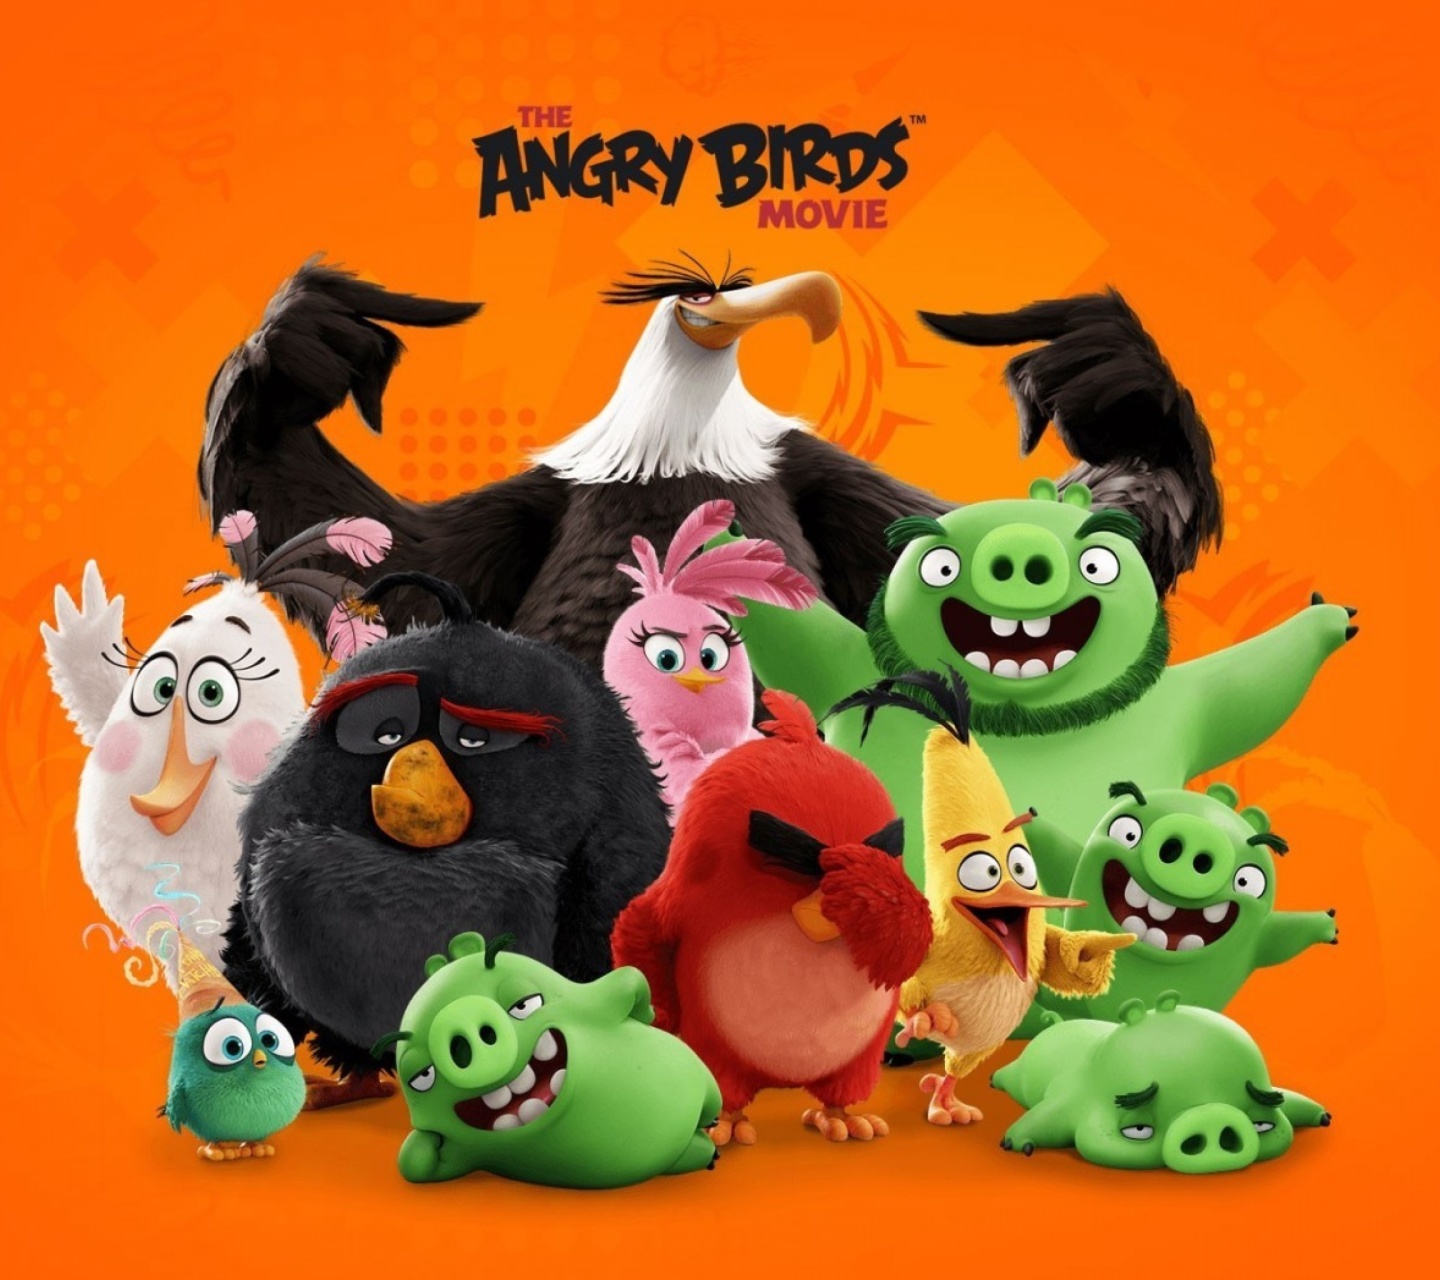 Angry Birds the Movie Release by Rovio screenshot #1 1440x1280